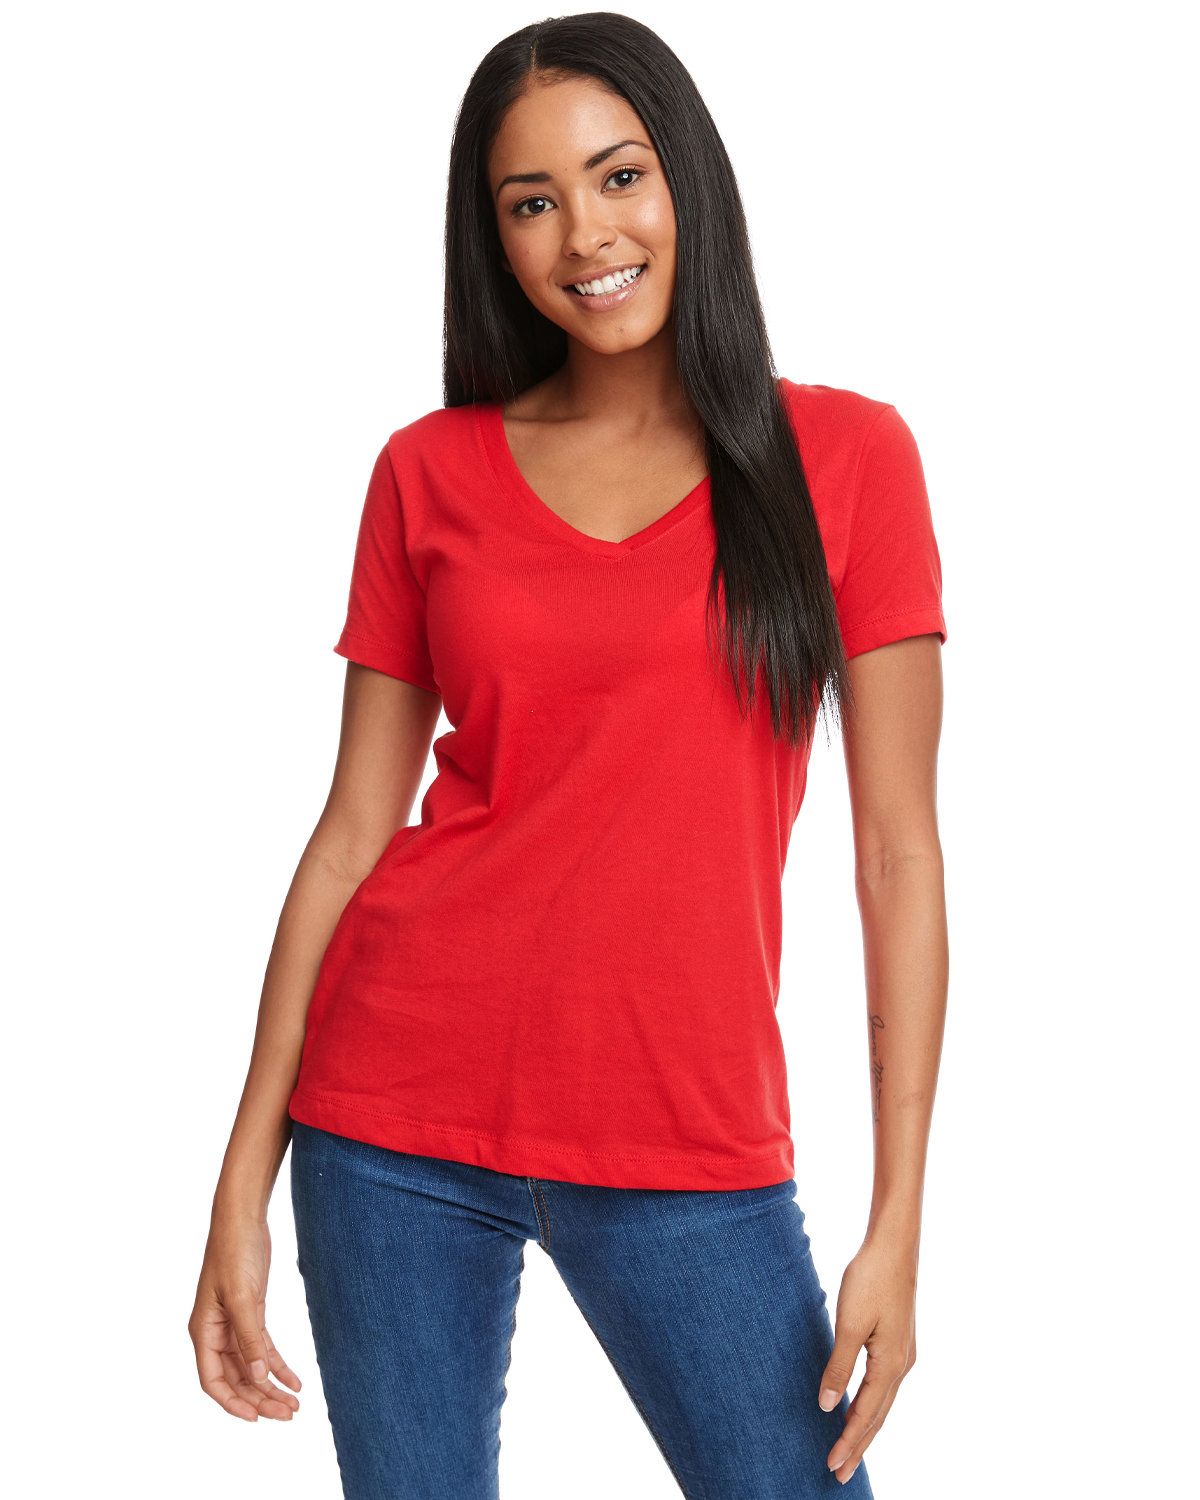 Next Level Apparel Ladies' Ideal V red 